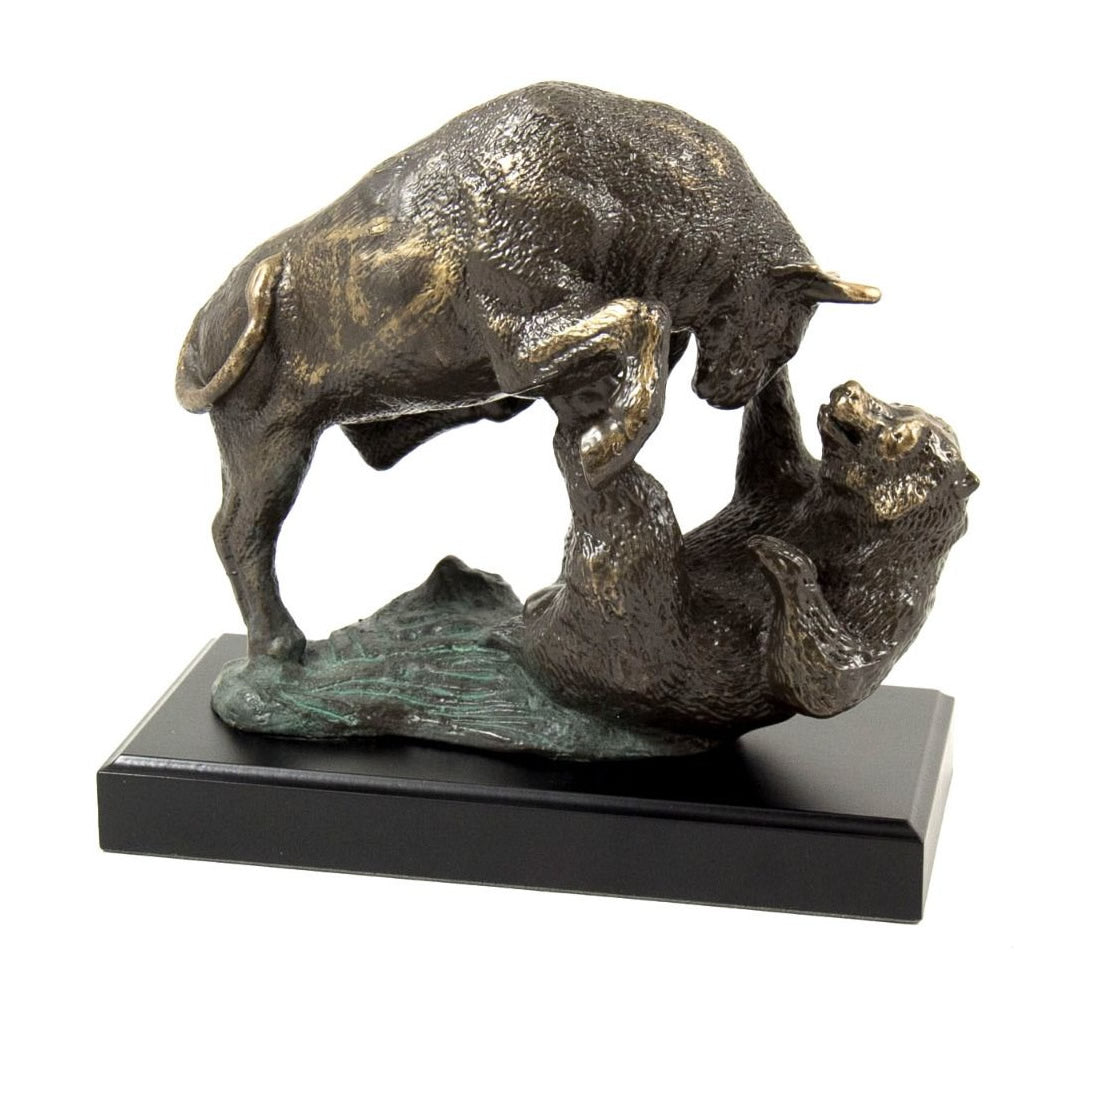 Fighting Bull and Bear Sculpture